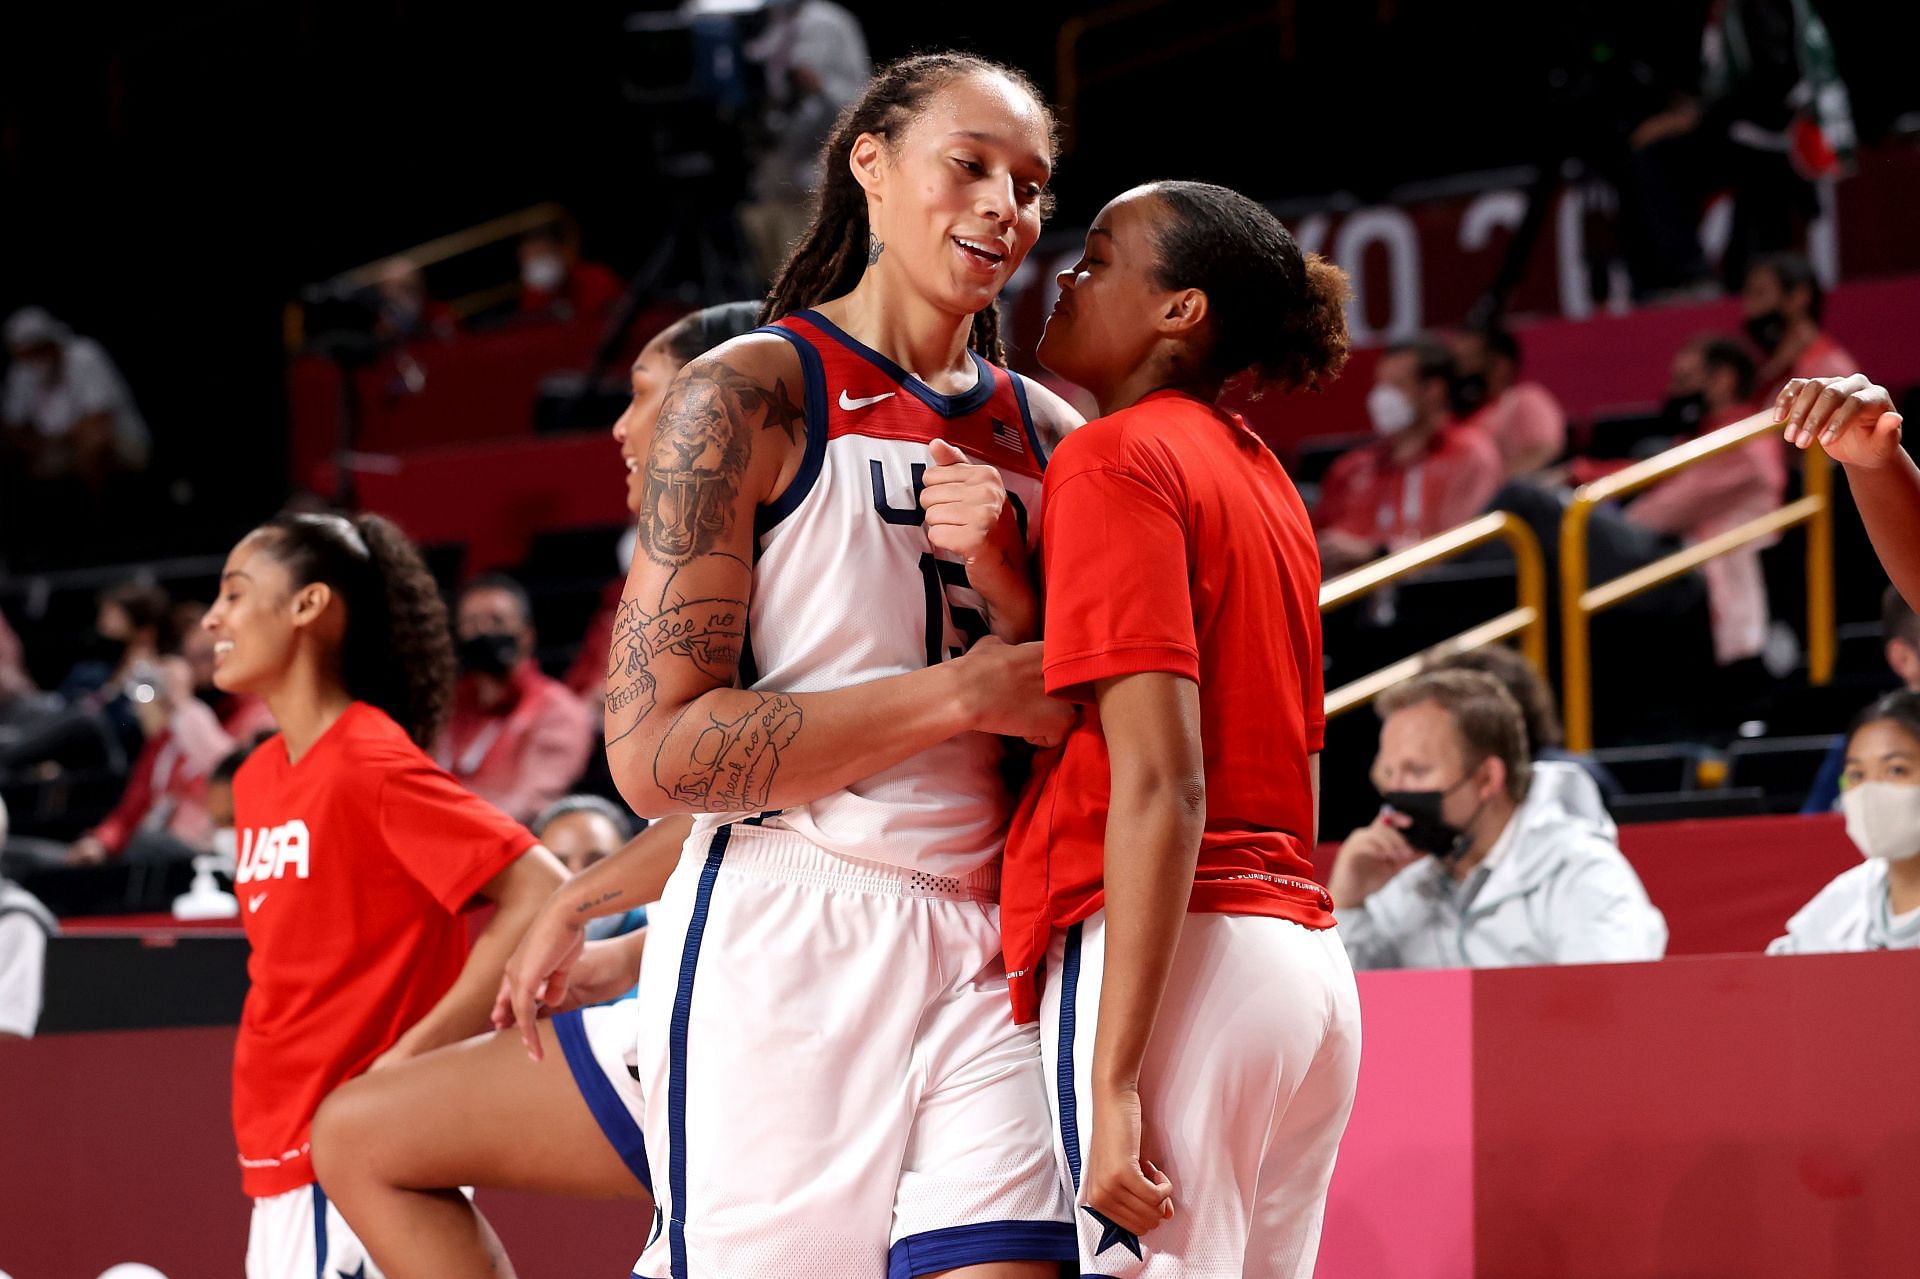 So that's why Brittney Griner is talking about her sexuality now.